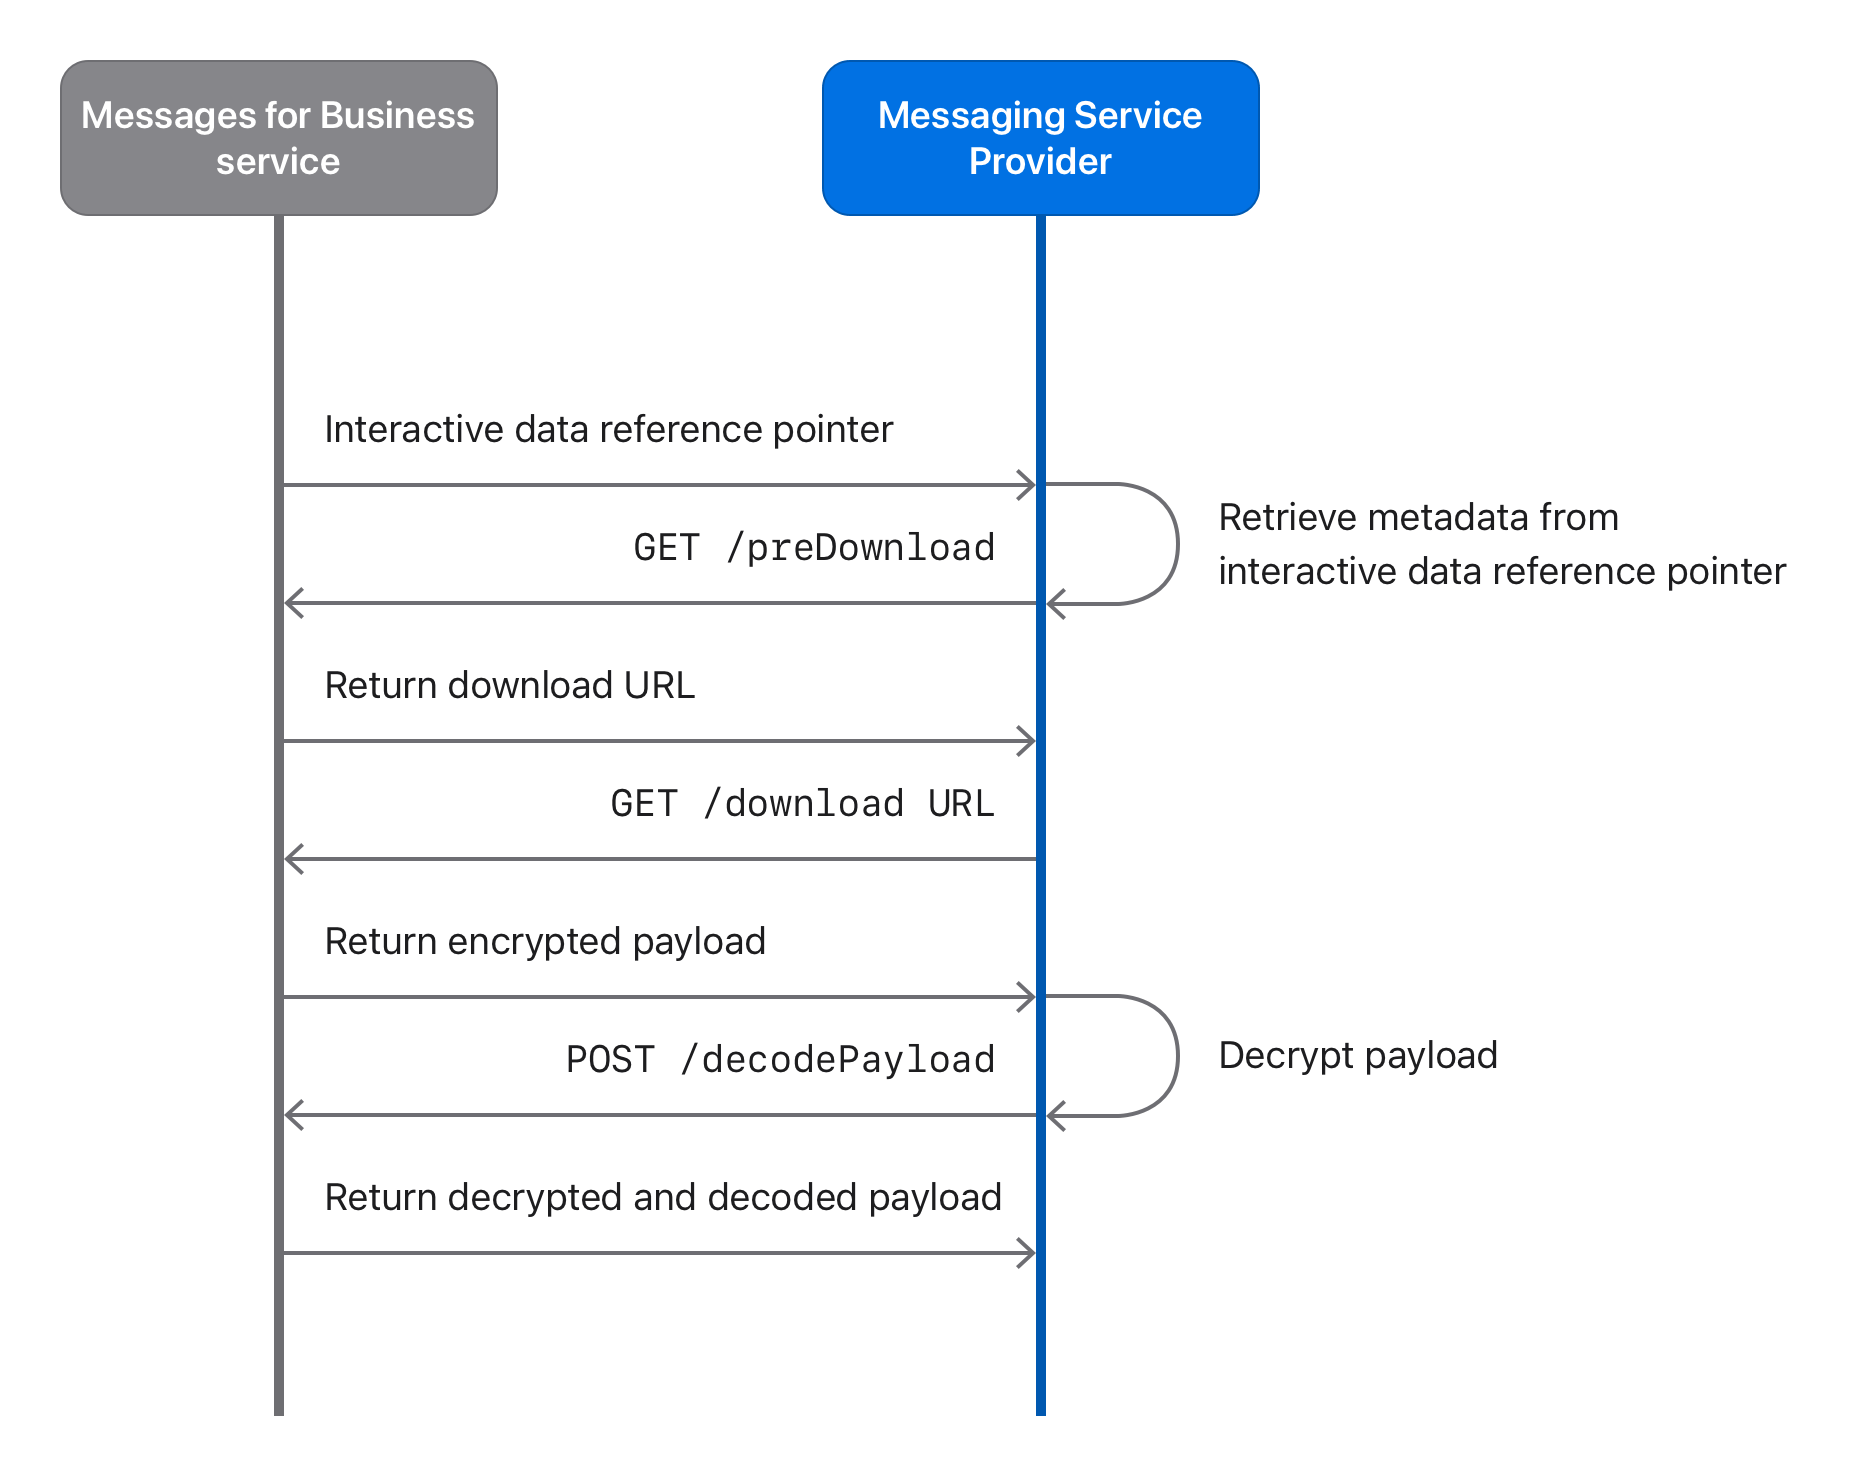 Diagram showing the download flow for a large interactive data dictionary from Messages for Business. Using metadata from the interactive data reference dictionary, call the /preDownload endpoint to get a temporary URL. Use the URL to download the encrypted file. Decrypt the file, then call the /decodePayload endpoint to retrieve the binary payload